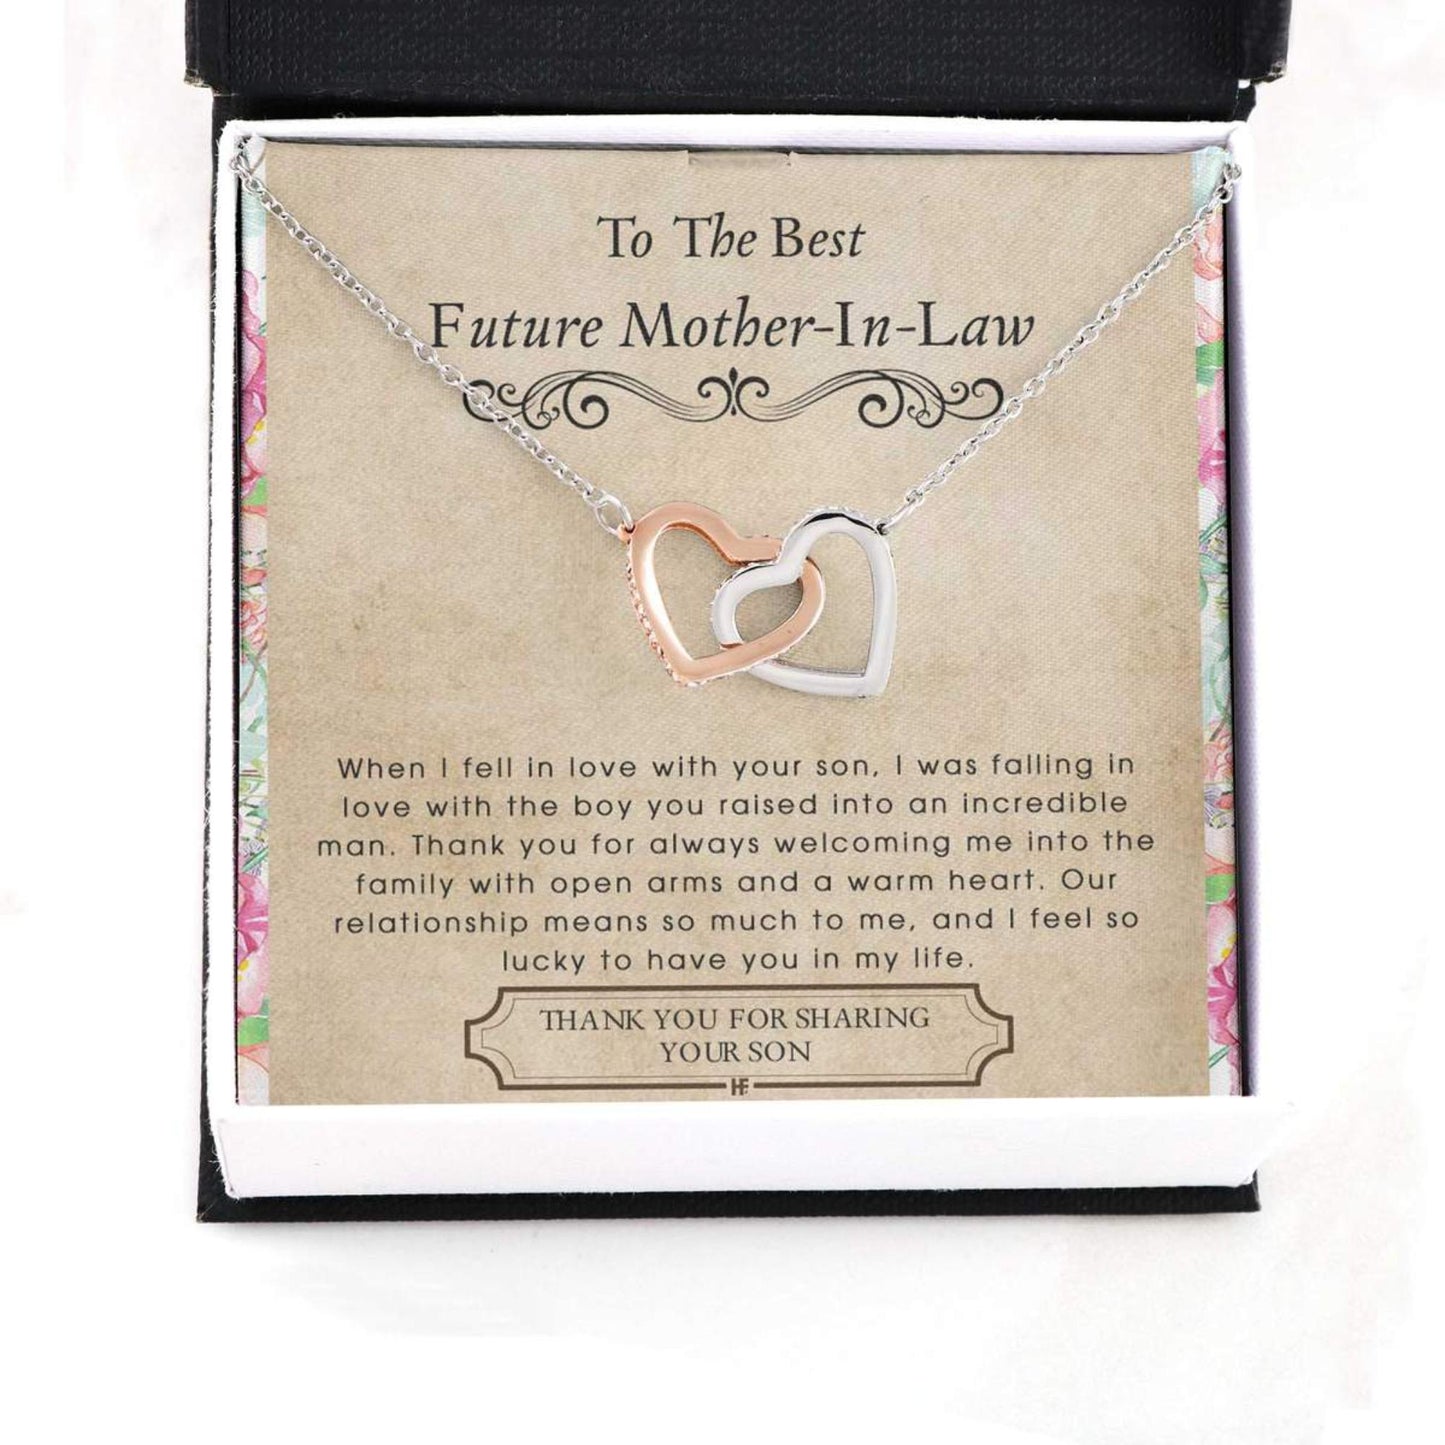 Mother-in-law Necklace, Future Mother In Law Necklace: Gift For Mother's Day From Future Daughter, Heartfelt Message Card